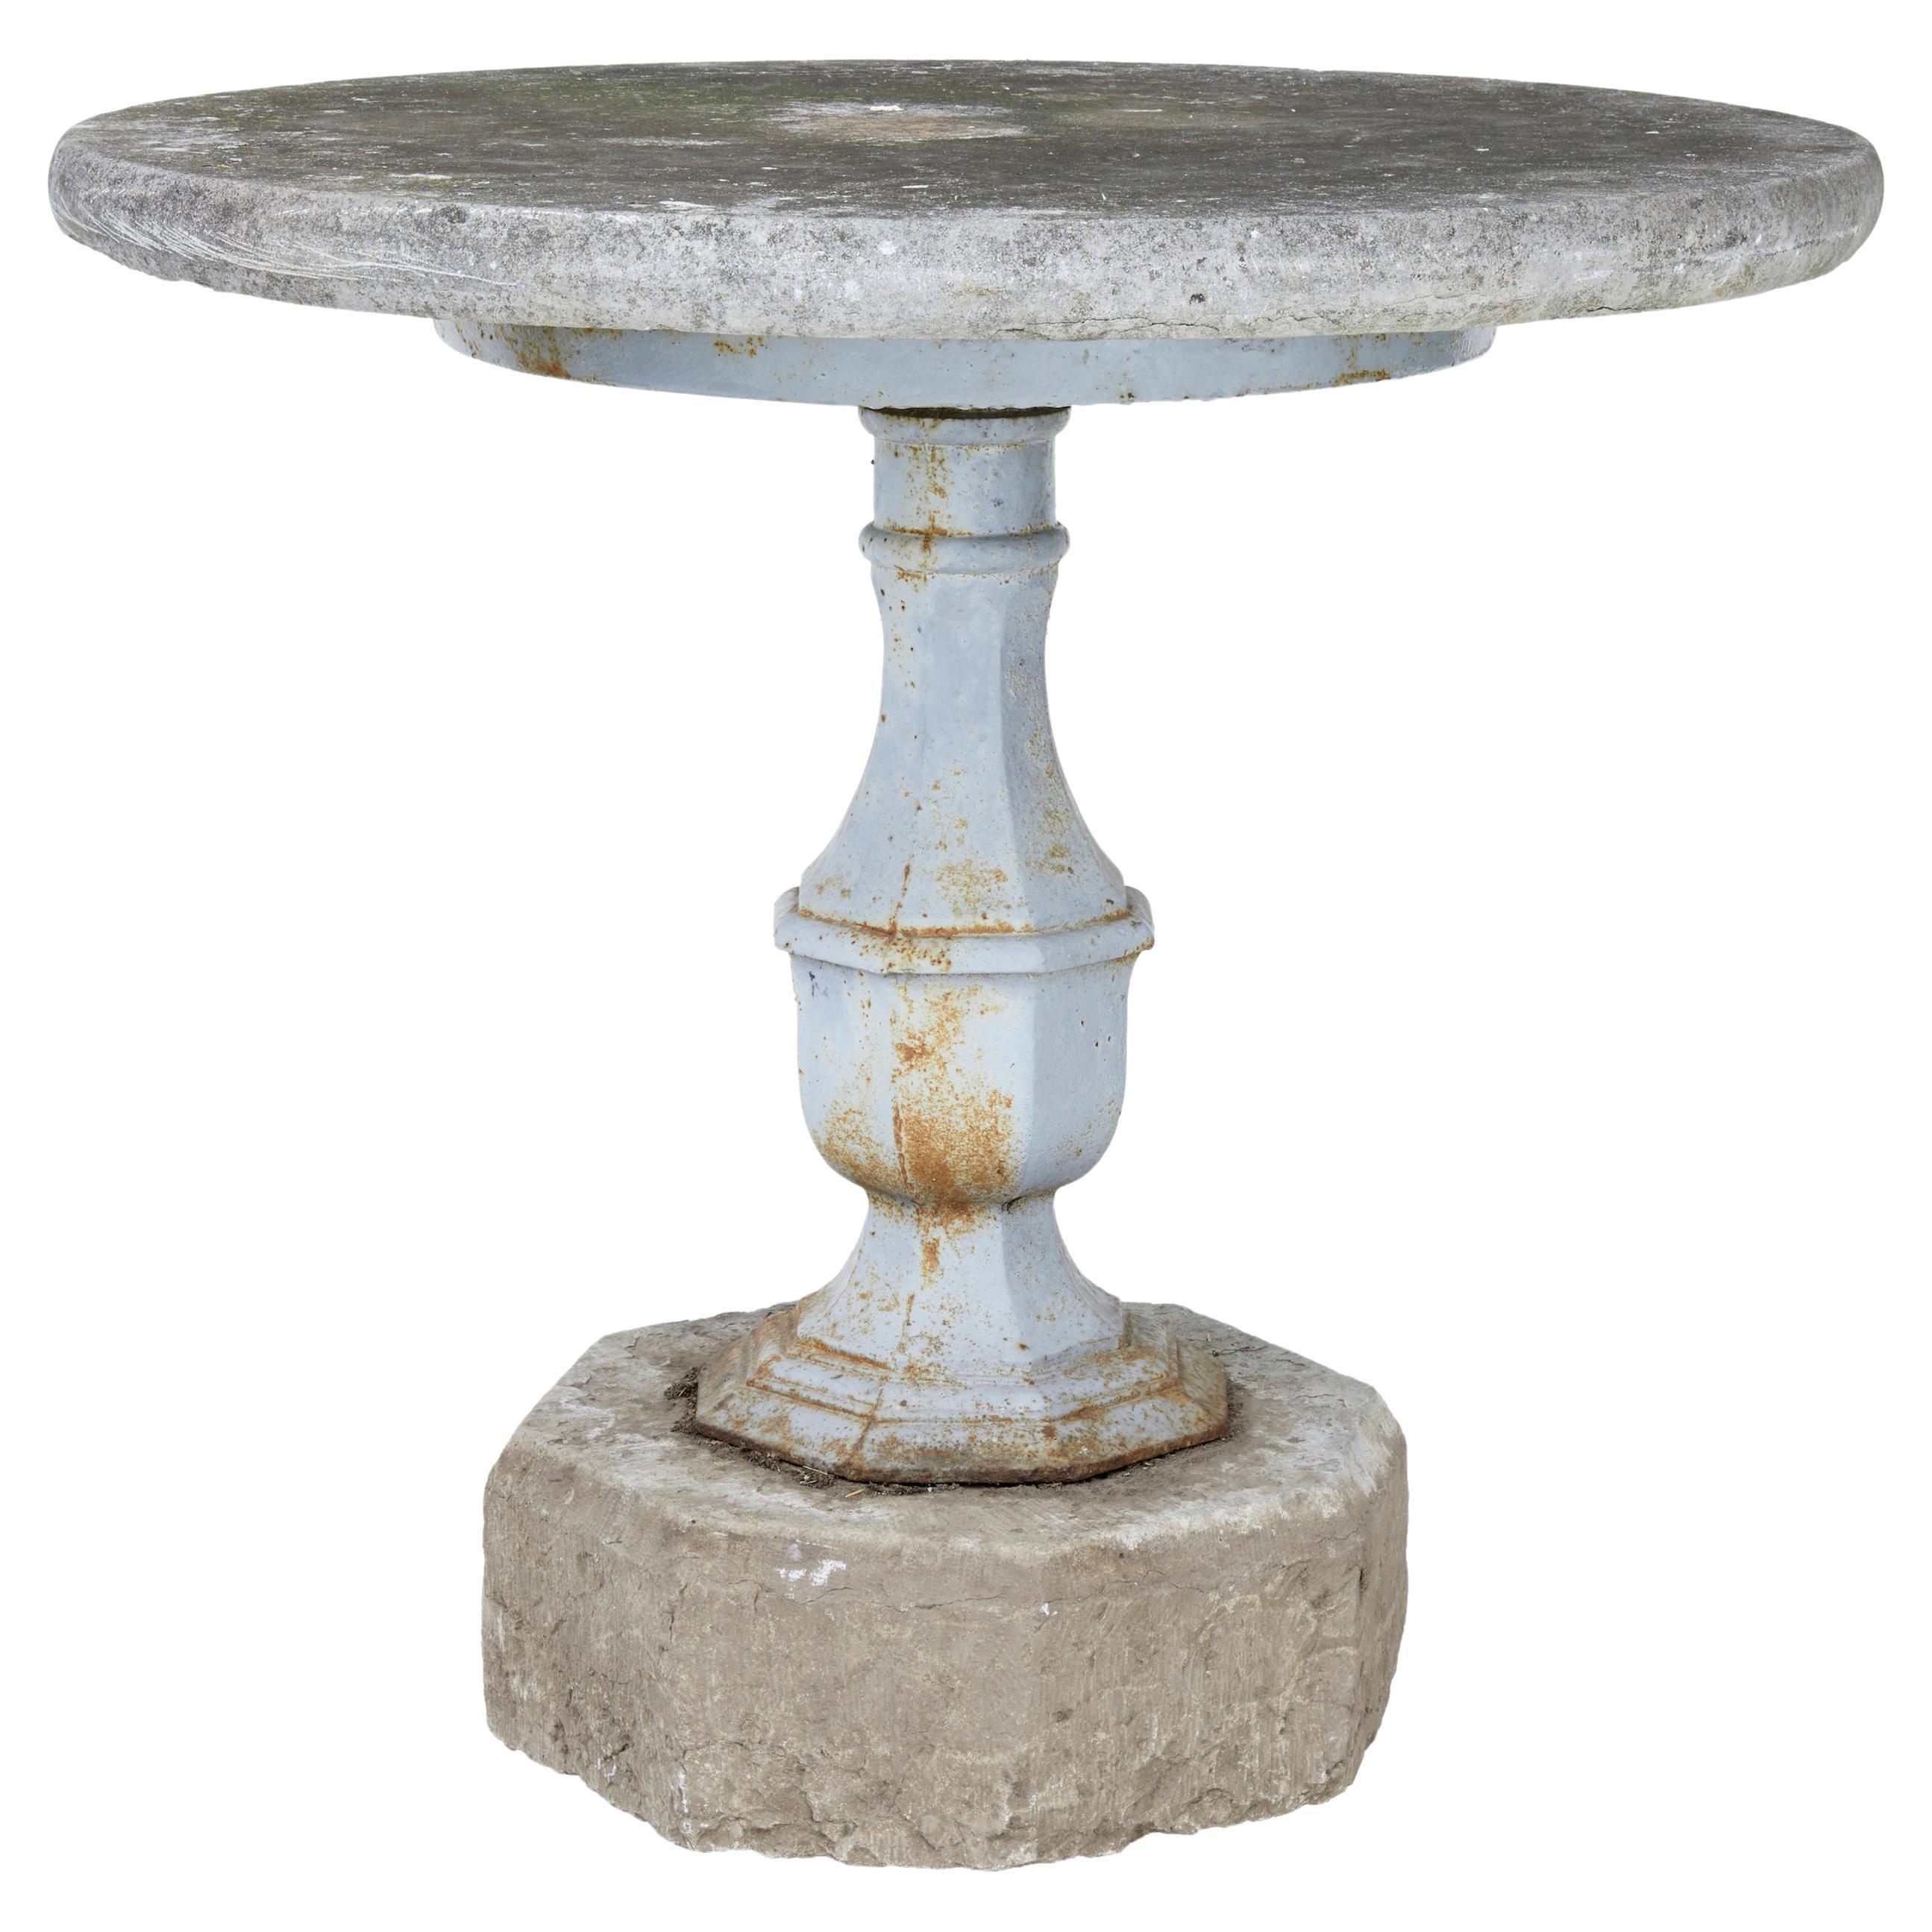 Rare 19th Century Swedish Stone and Iron Garden Table For Sale